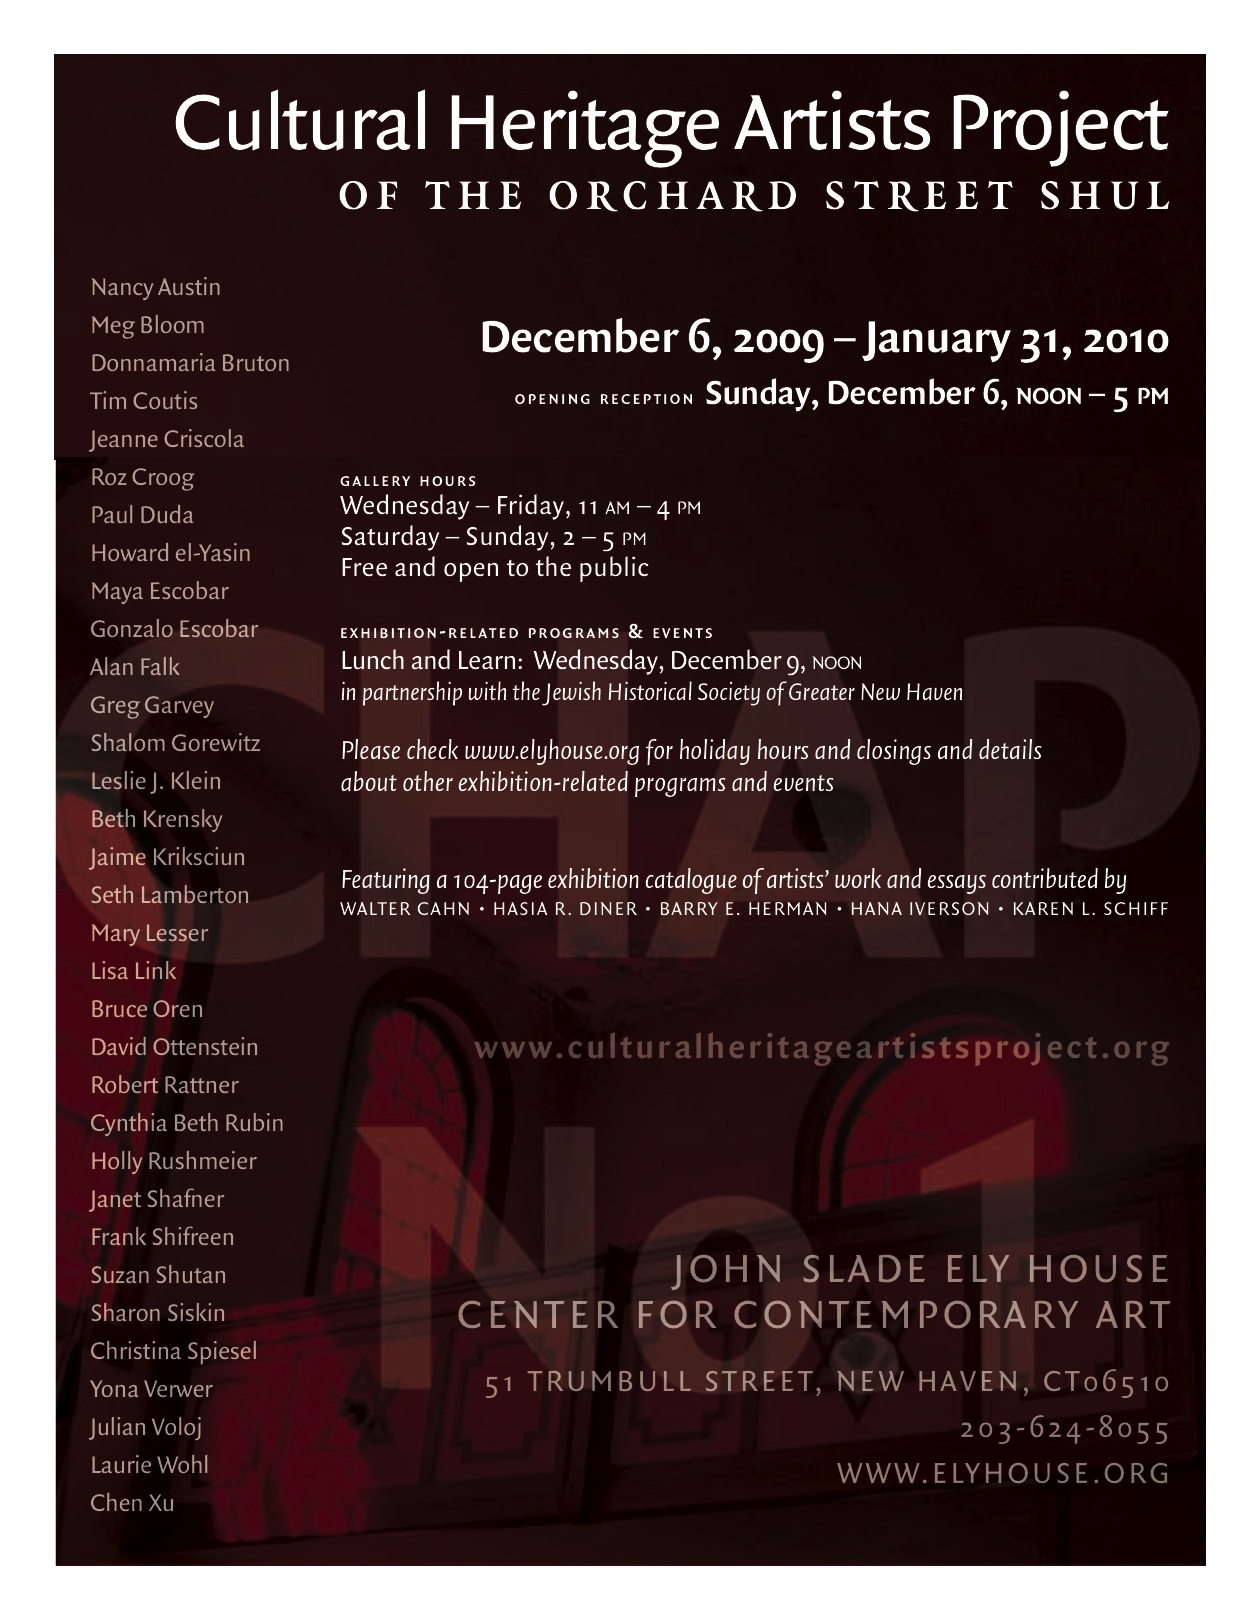 Orchard Street Shul Cultural Heritage Artists Project